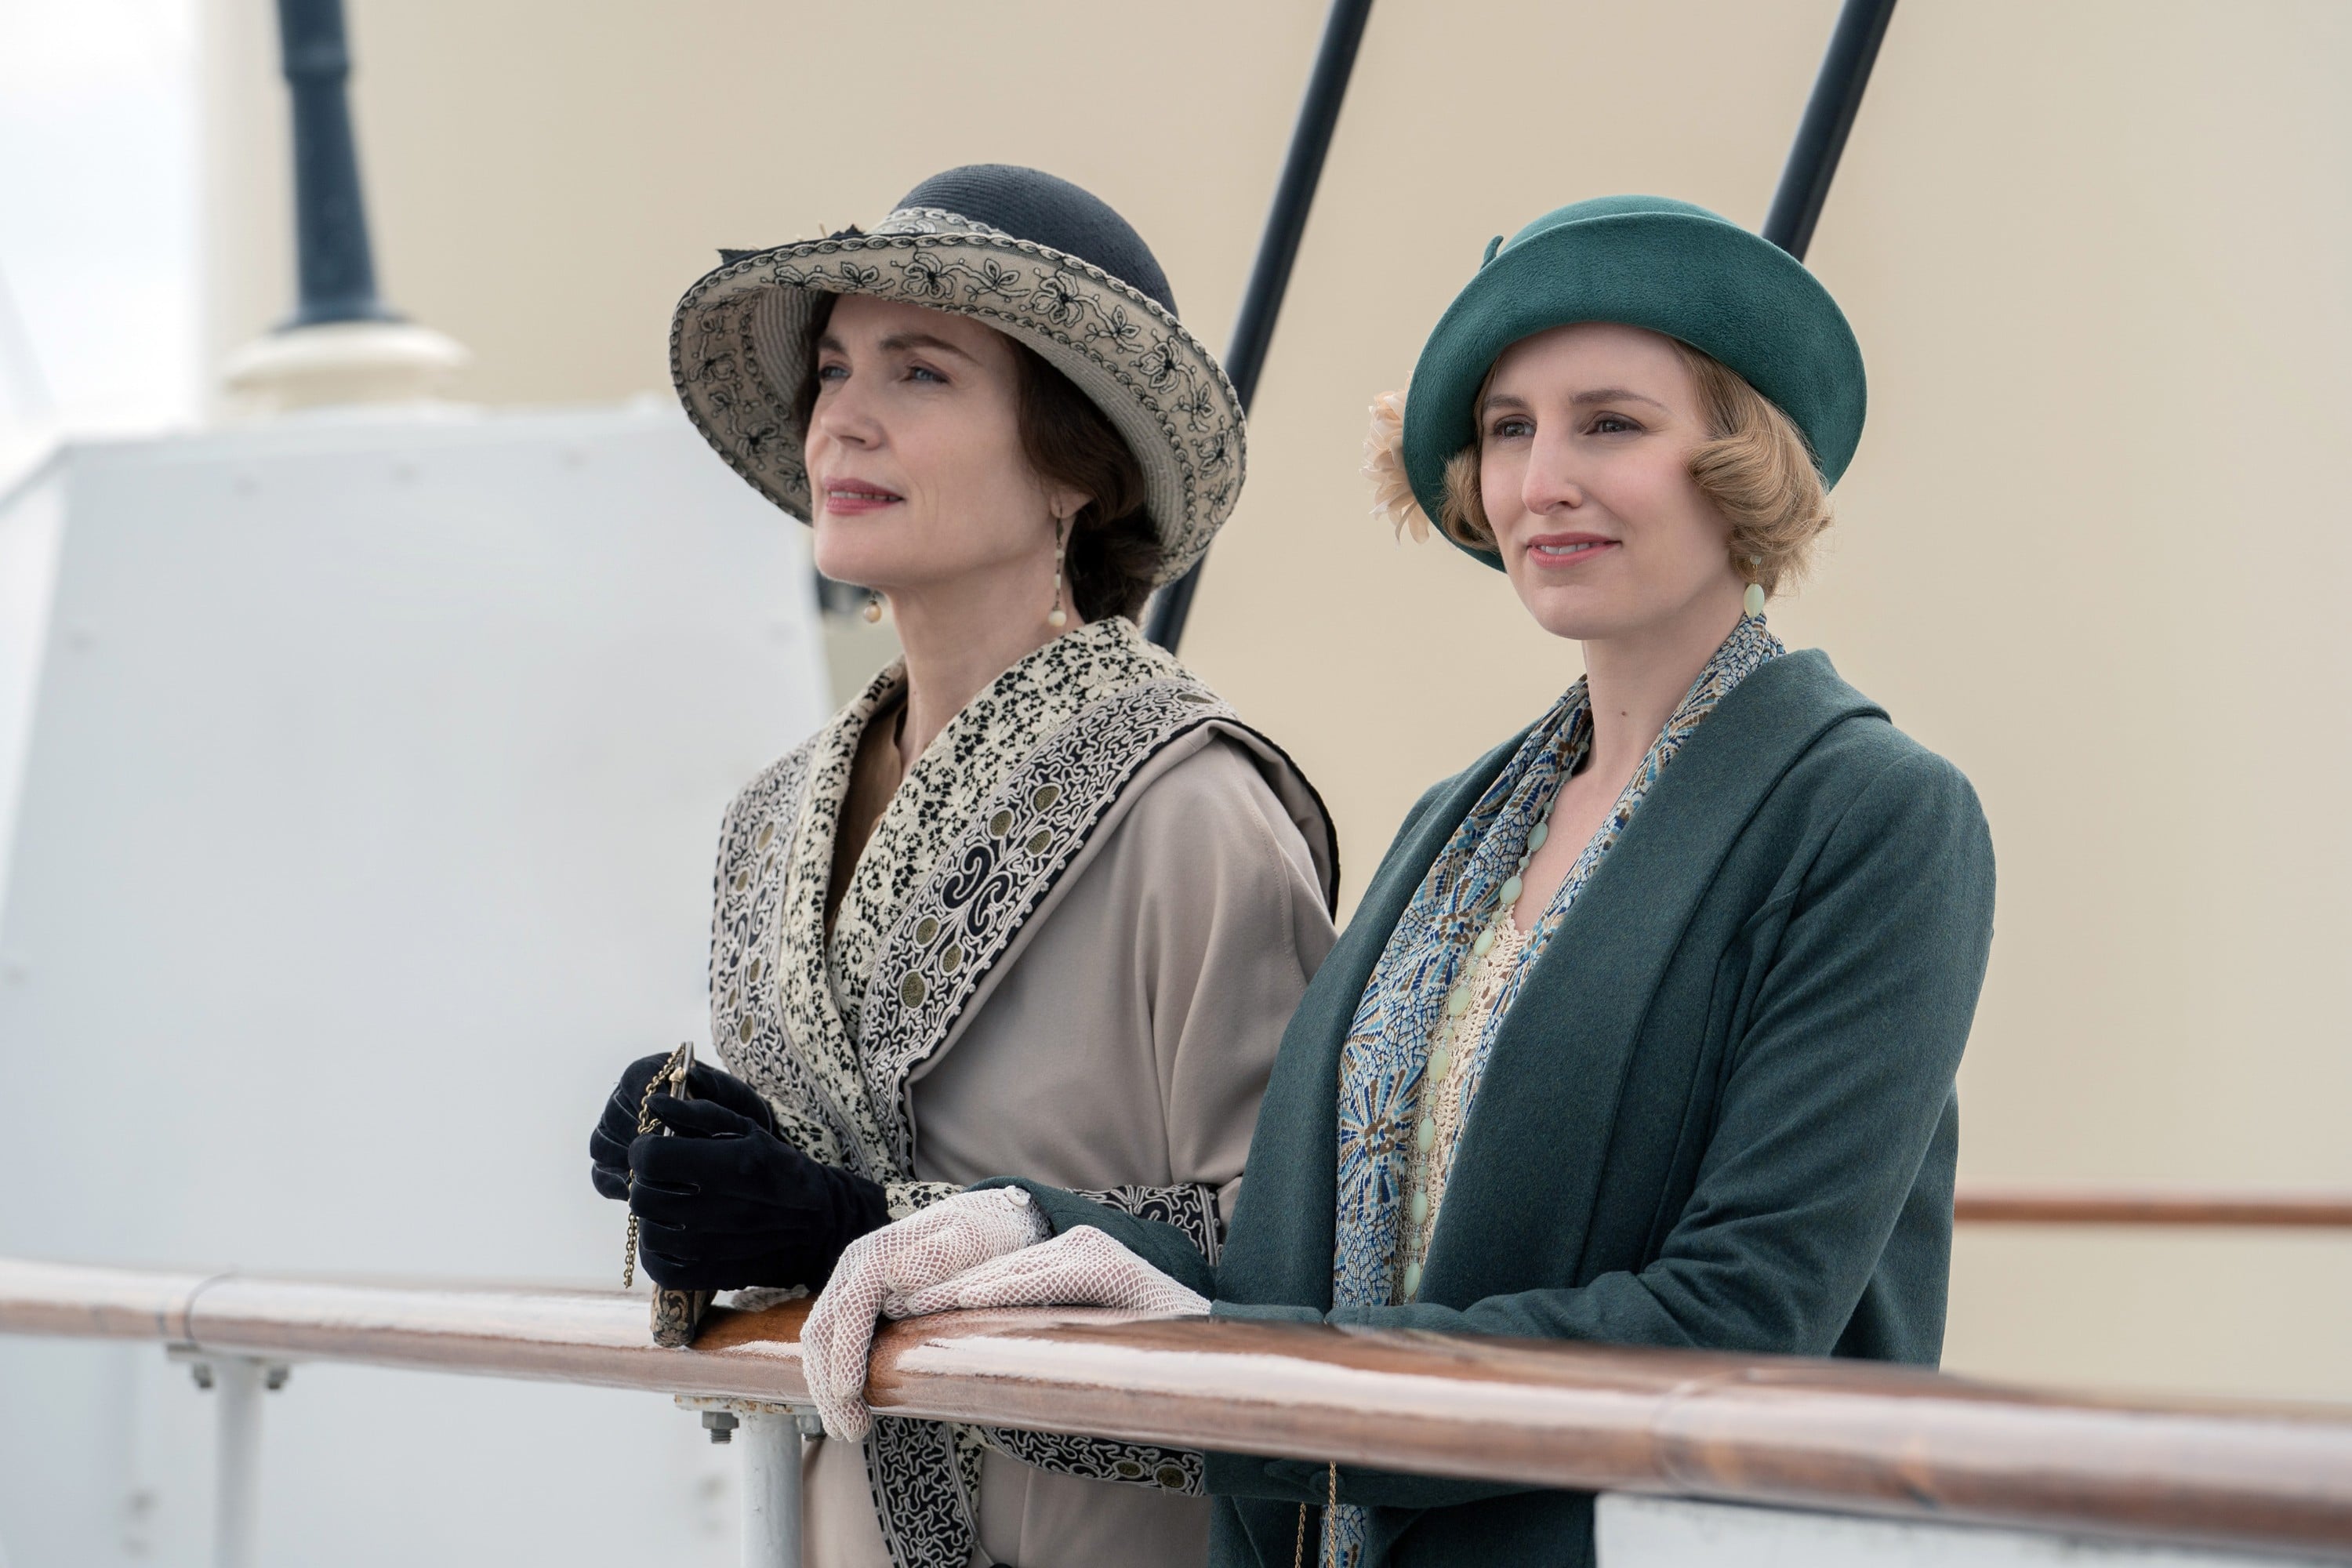 40 Things You Didn't Know About 'Downton Abbey' - Downton Abbey Facts